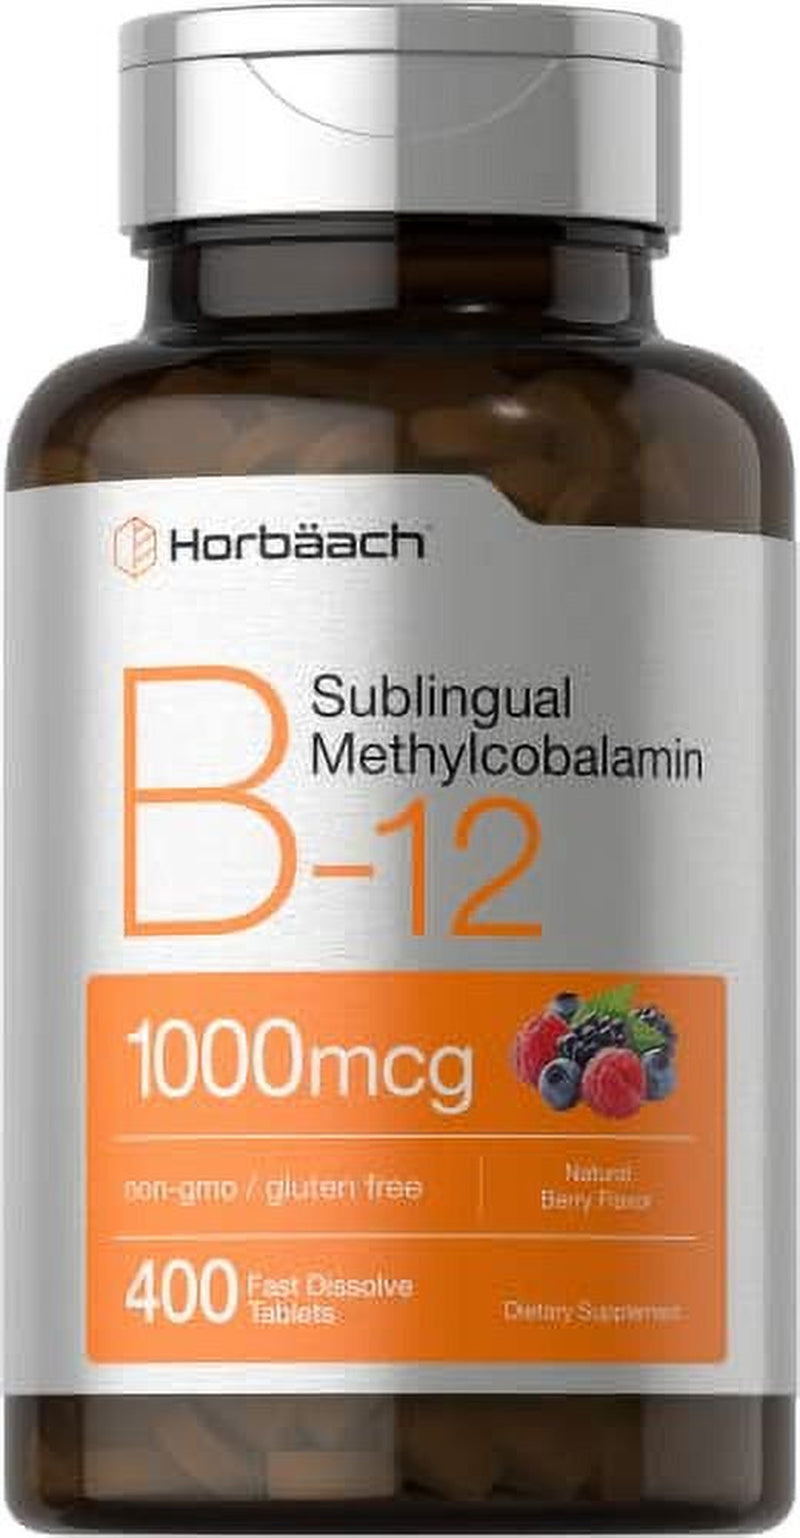 Vitamin B12 Sublingual 1000 Mcg | 400 Fast Dissolve Tablets | Methylcobalamin Supplement for Adults | Natural Berry Flavor | Vegan, Vegetarian, Non-Gmo, and Gluten Free | by Horbaach